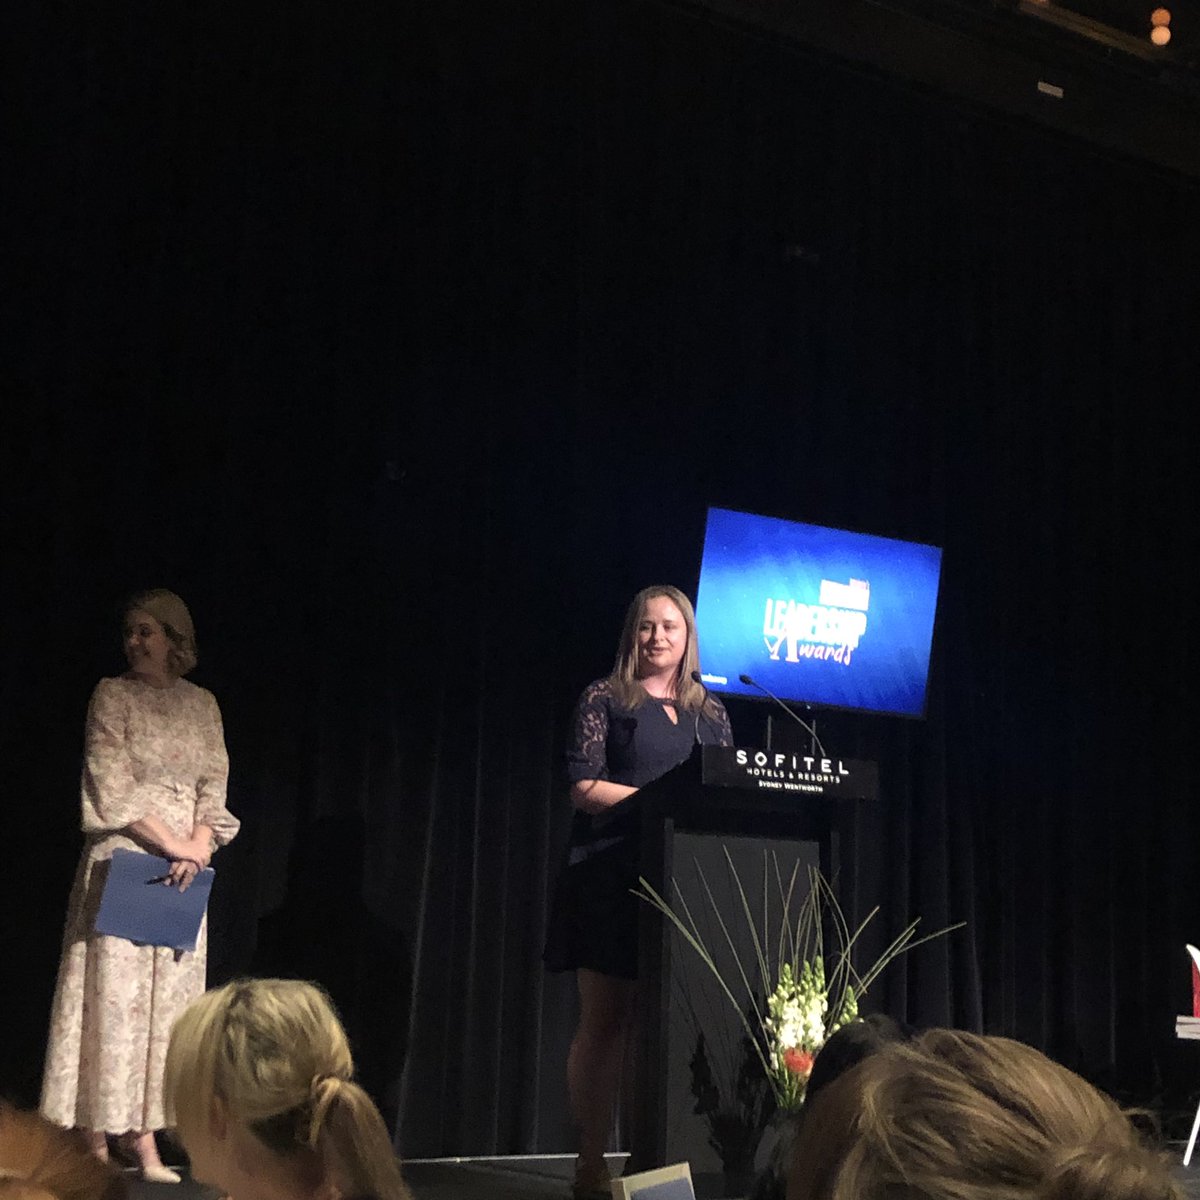 Congrats to Narelle Underwood, NSW’s first female Surveyor General on winning the emerging female leader in Govt or Public sector at the @WomensAgenda Leadership Awards! #nswgovt #wala2019